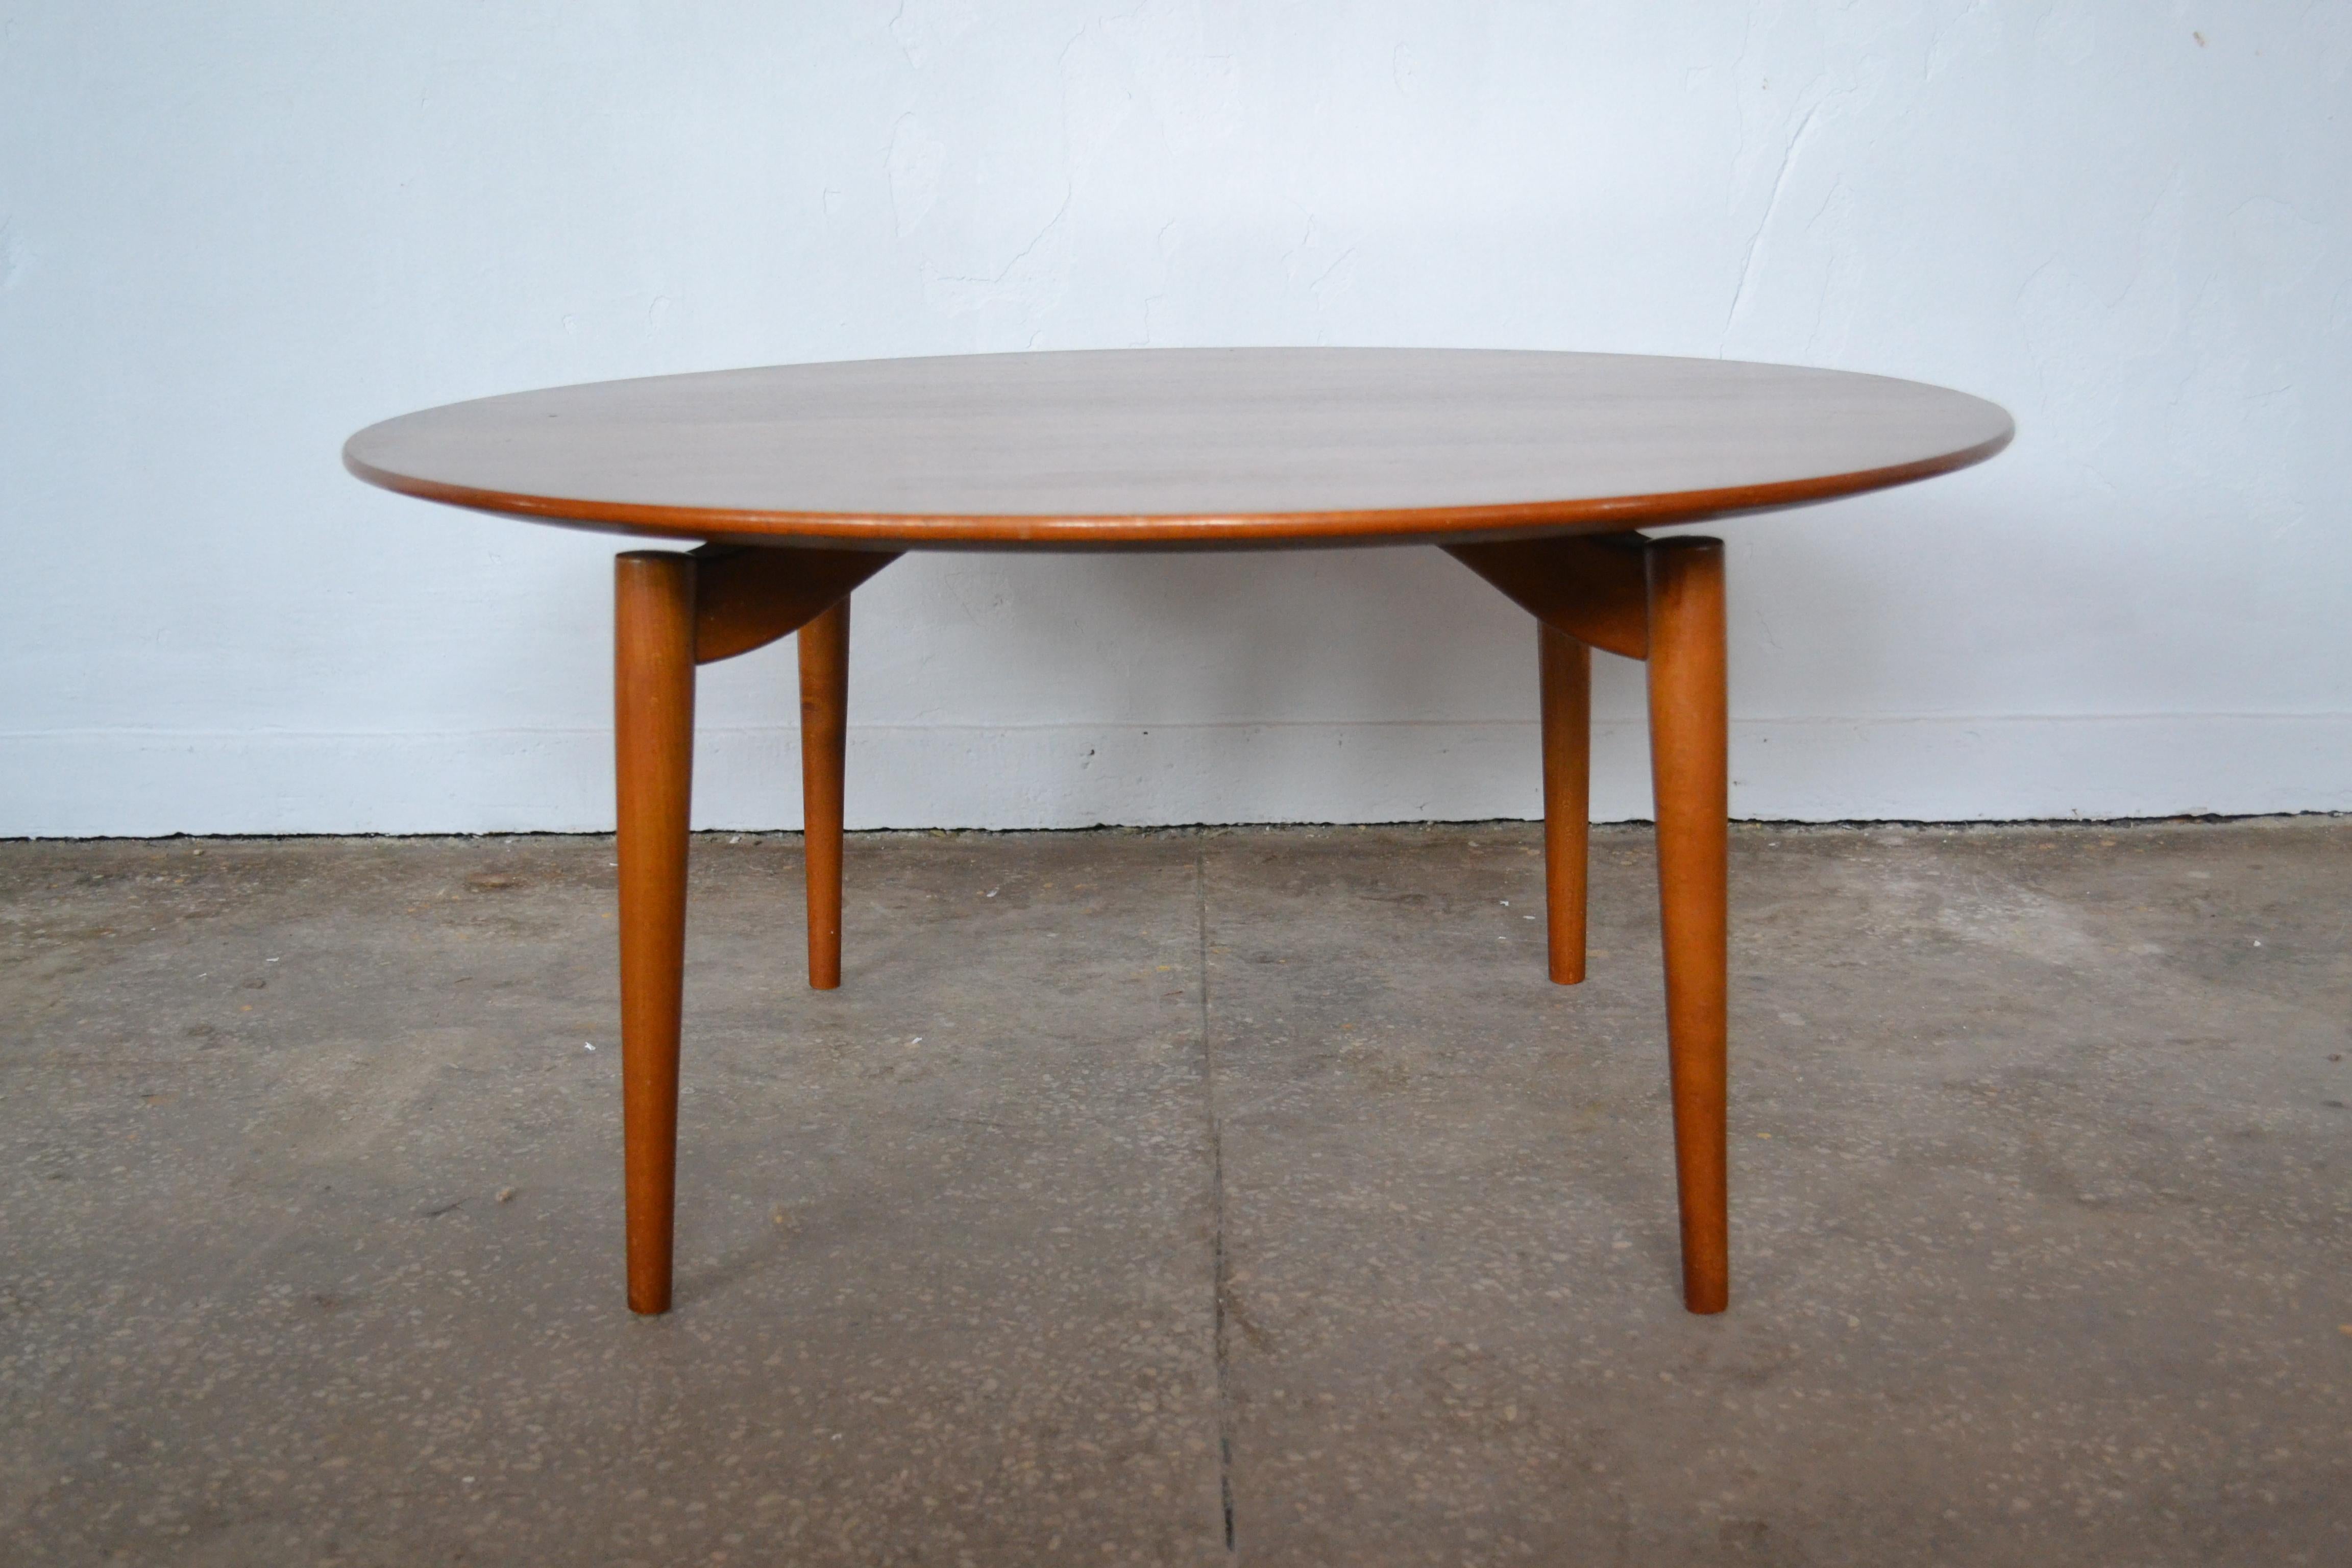 This rosewood coffee table was designed by Grete Jalk for Poul Jeppesen in the 1950s and is in original condition.